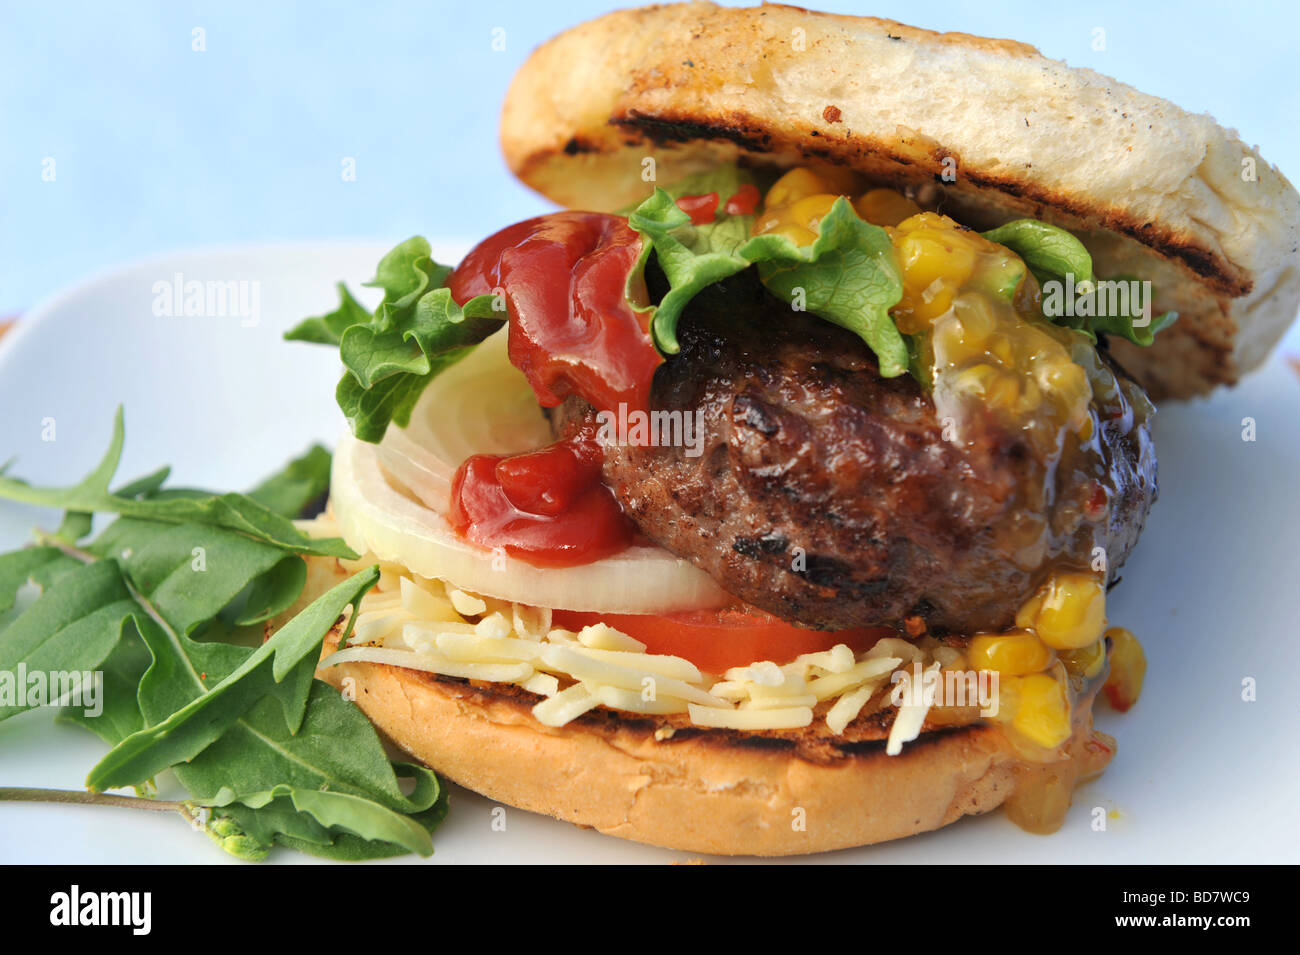 Burger in bun with cheese onion sweetcorn relish and salad Stock Photo